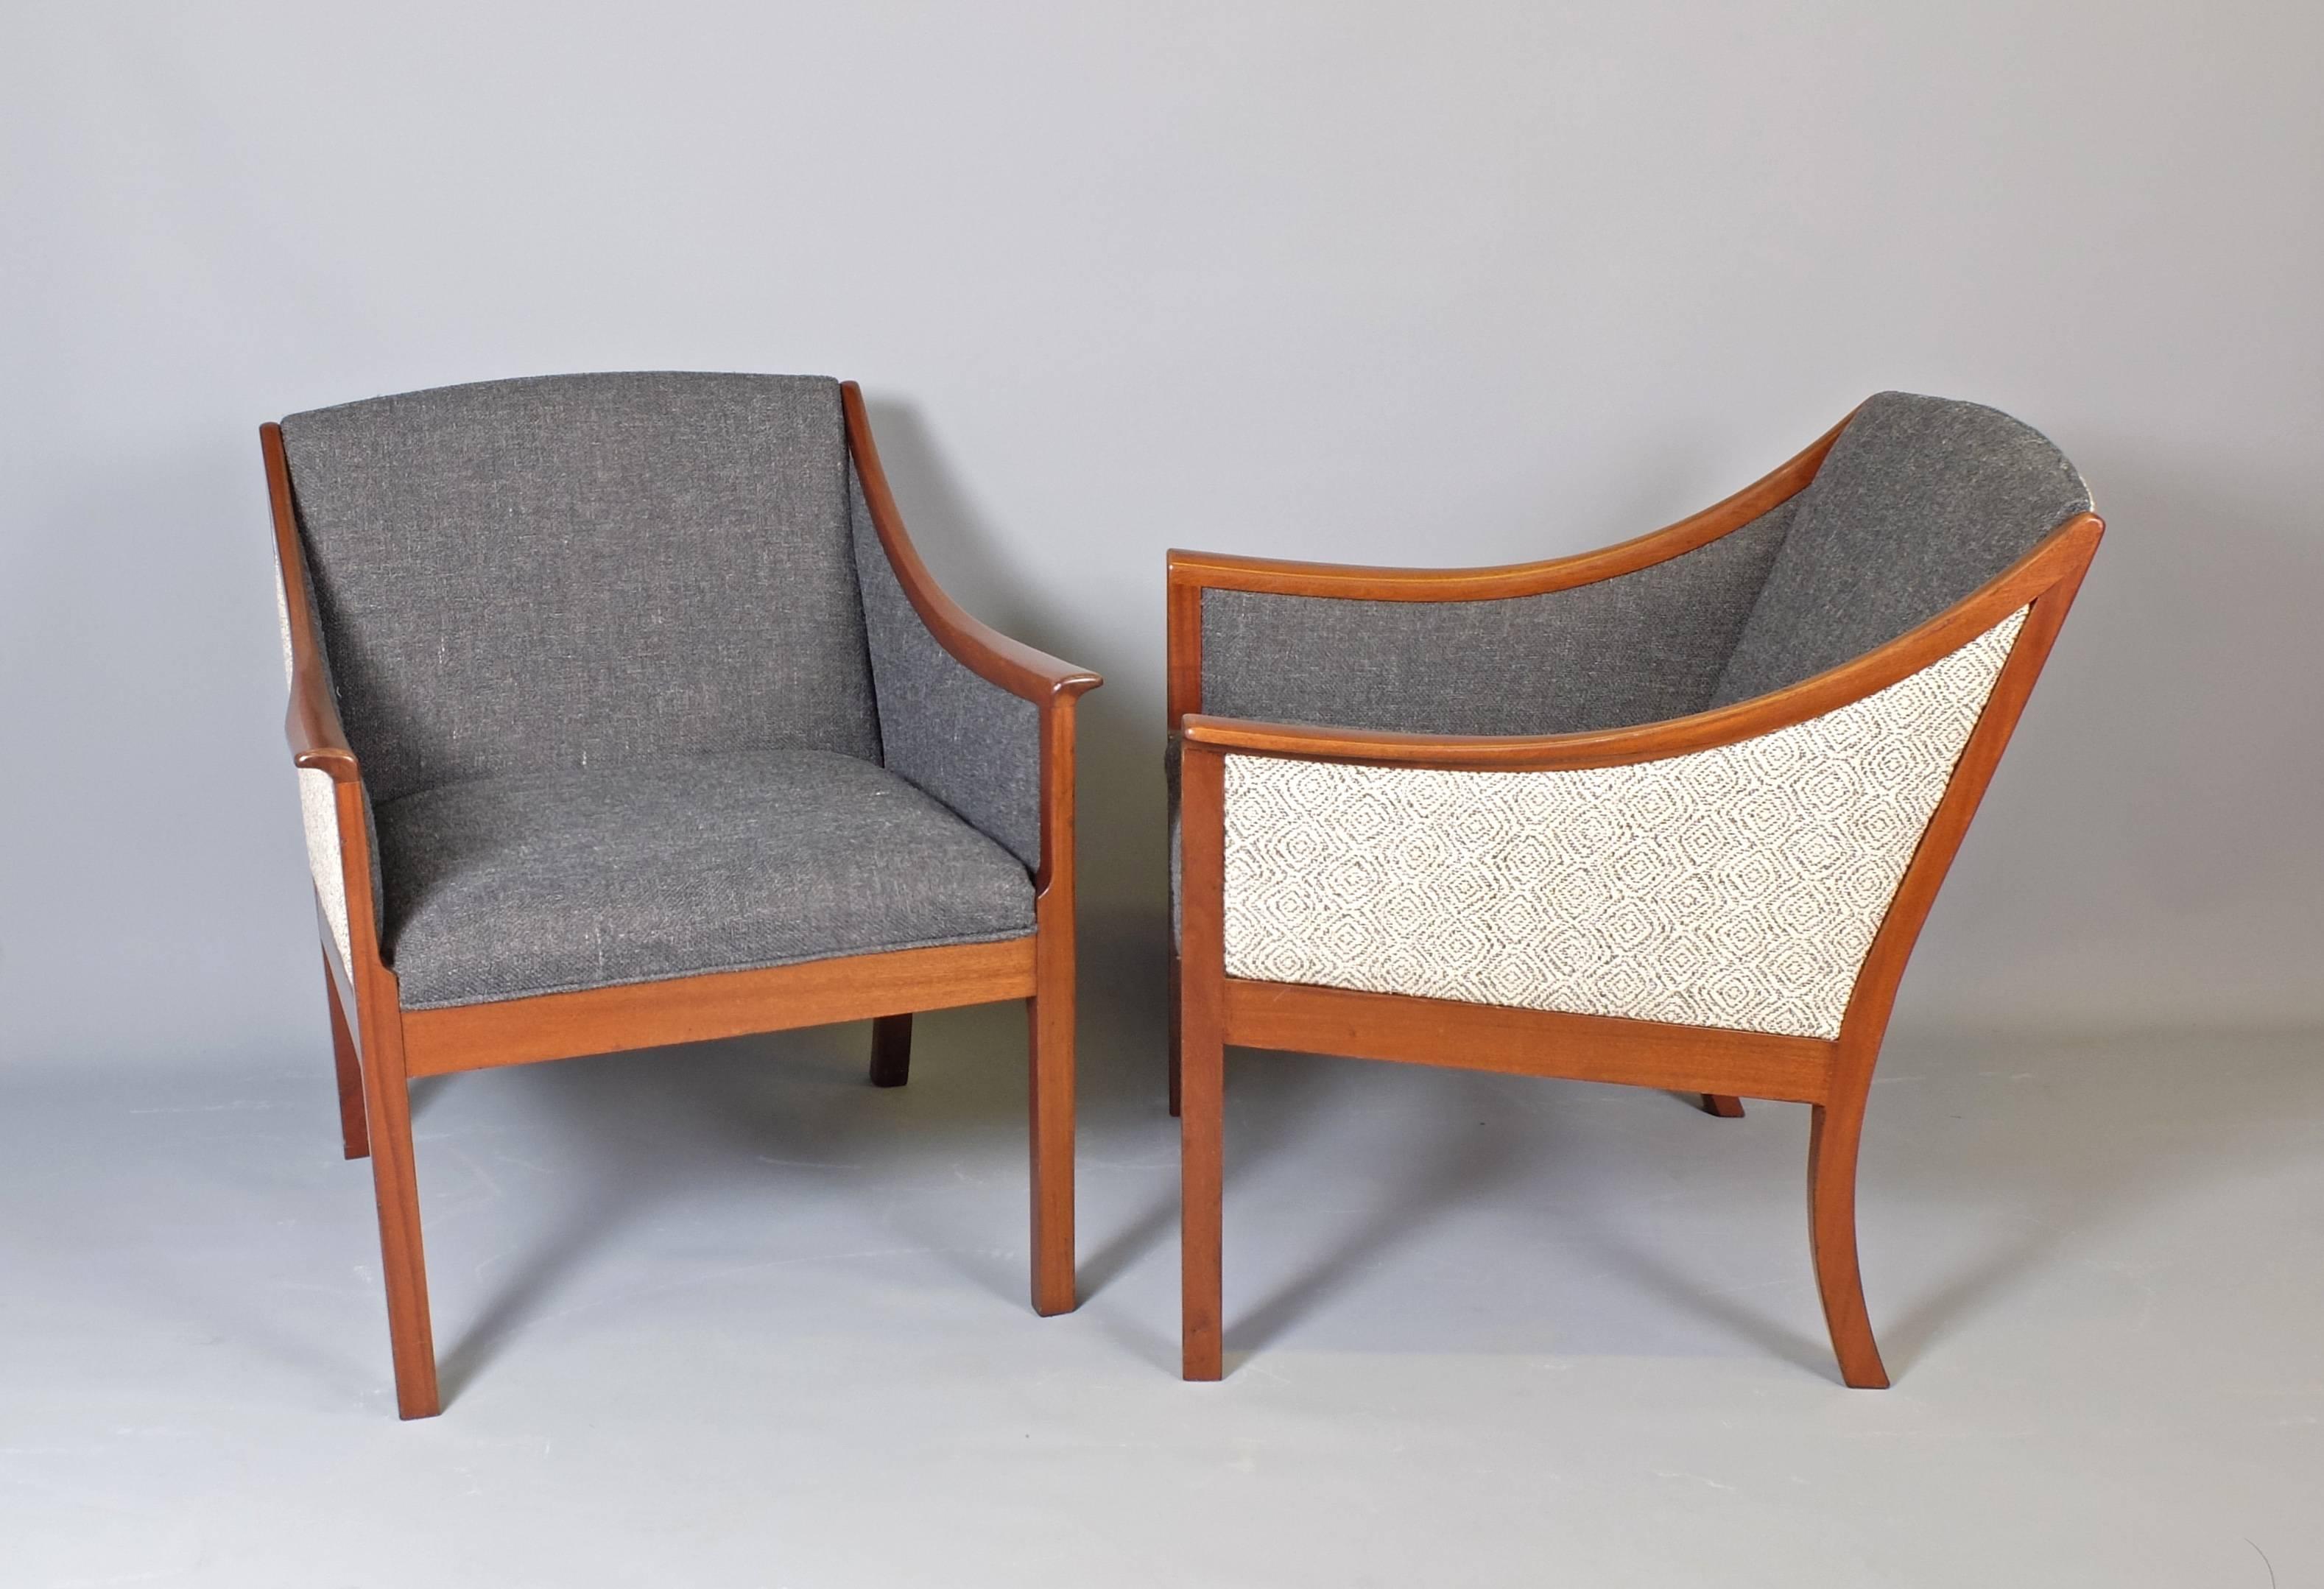 Danish Ole Wanscher for Poul Jeppesen Mahogany Sofa and Pair of Lounge Chairs, 1950s